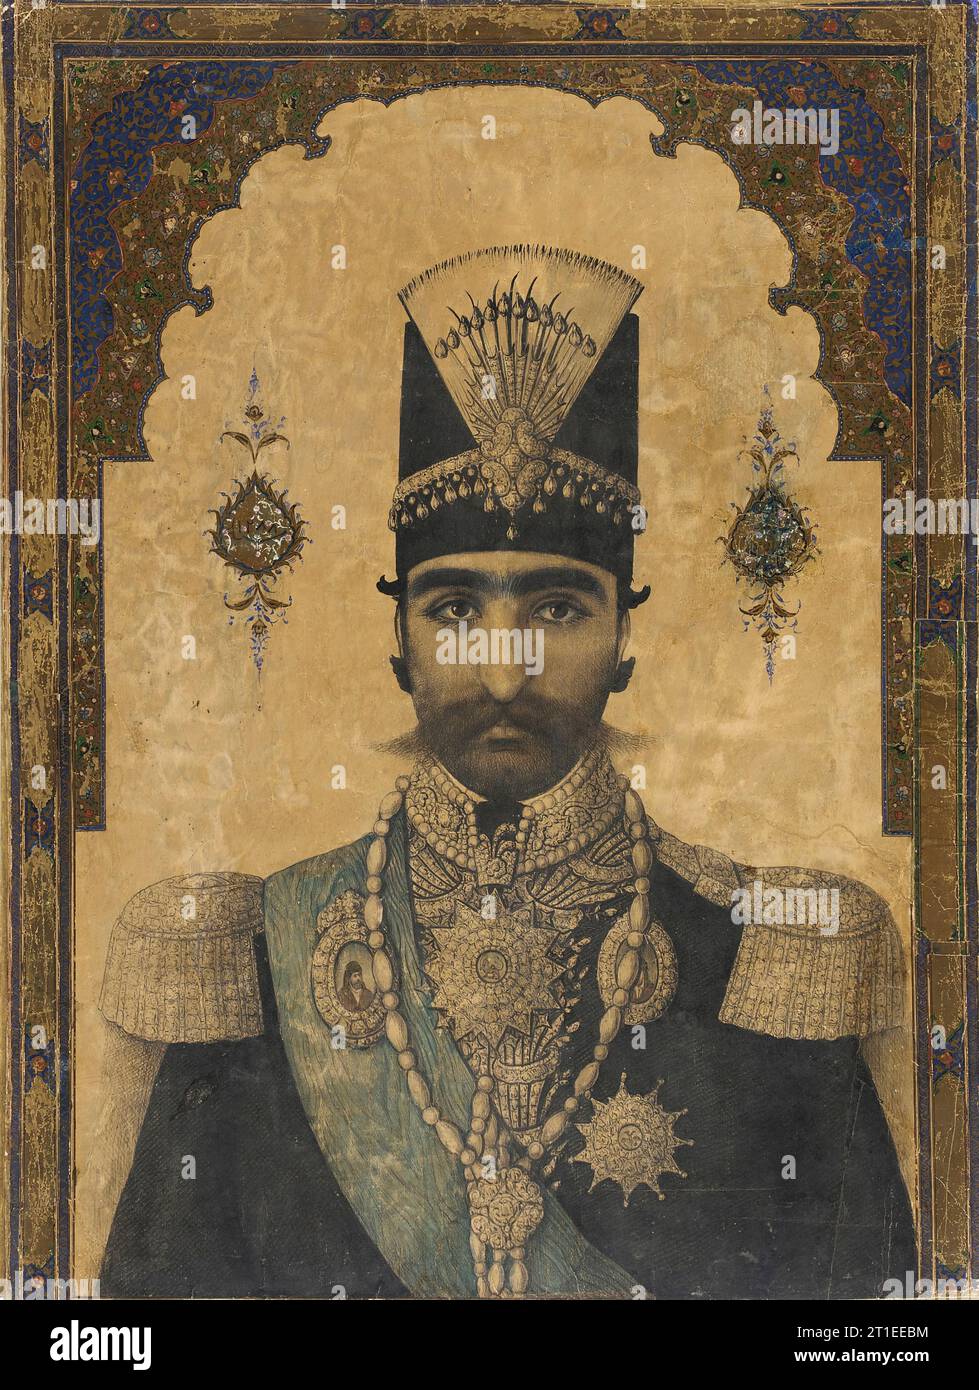 Early Portrait of Nasr al-Din Shah (reigned 1848-1896), c1850.The shah is shown here at perhaps just nineteen or twenty years of age, wearing jeweled portraits of the Shi&#x2018;ite Imams, probably Ali and Hasan, along with royal insignia. The archlike illuminated frame references the past, while the realistic depiction reflects more recent Western influences, including the advent of portrait photography. Two ornate medallions on either side of the shah&#x2019;s head preserves the date and the royal sitter&#x2019;s name. Stock Photo